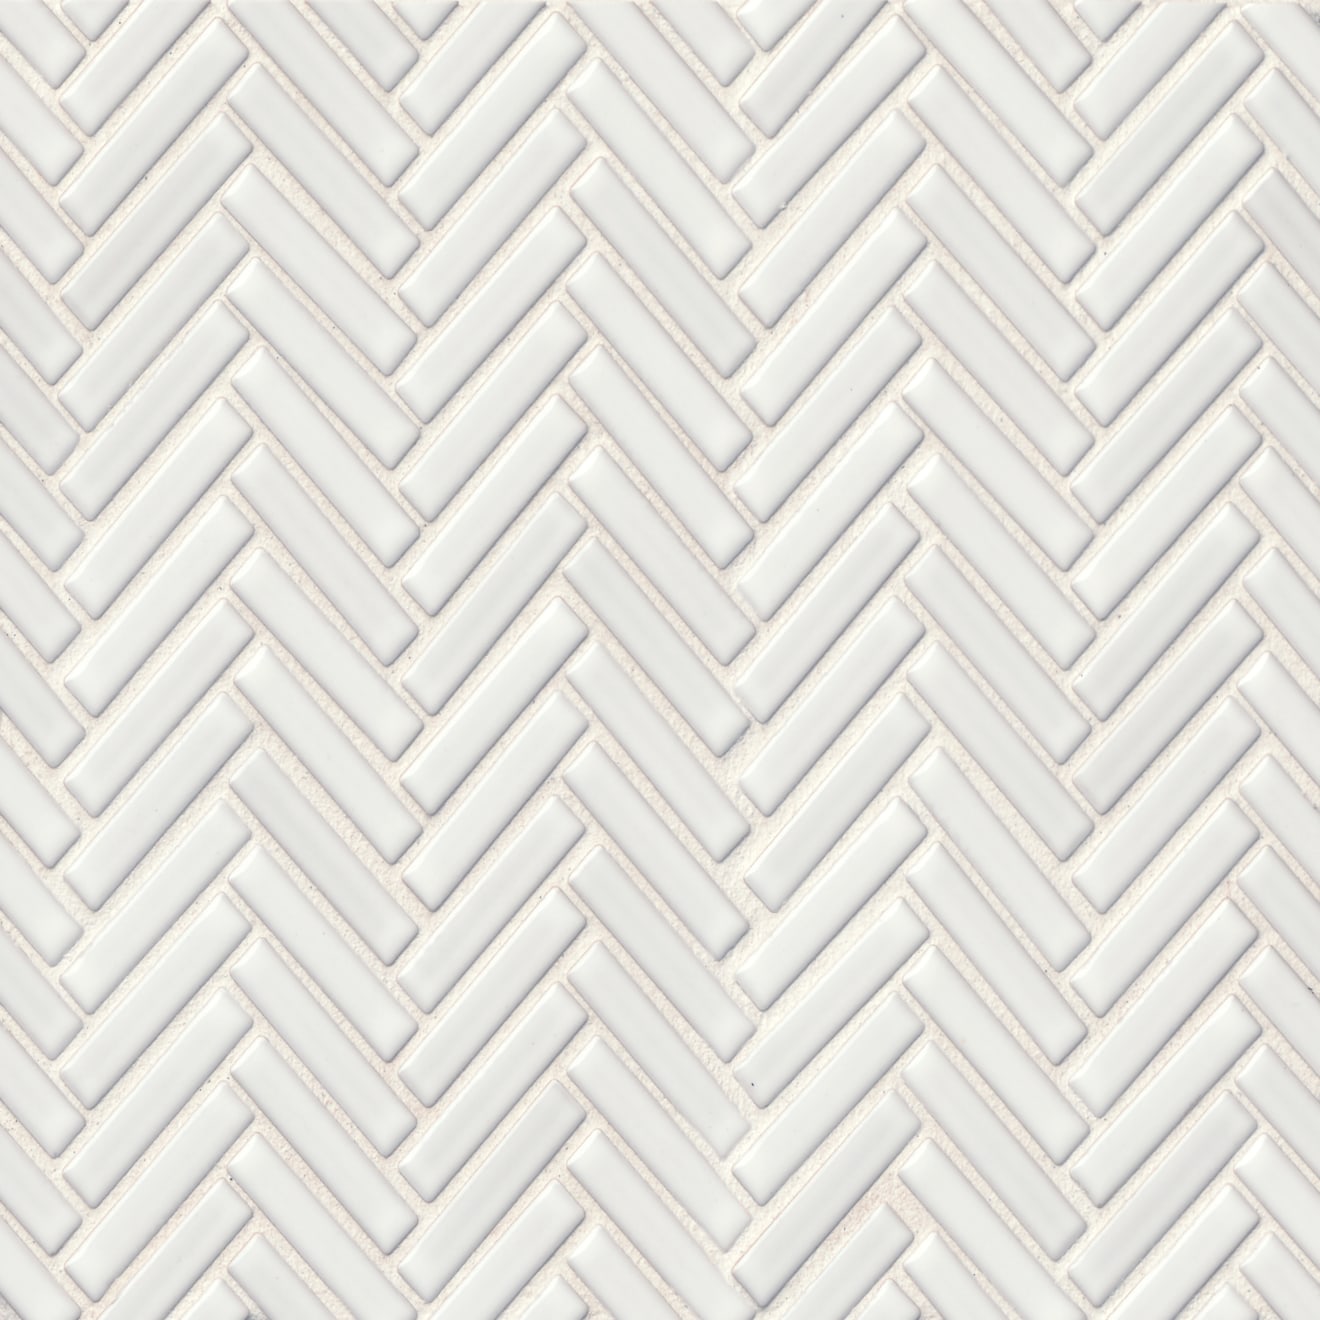 Herringbone tile in the color White on a neutral background. 